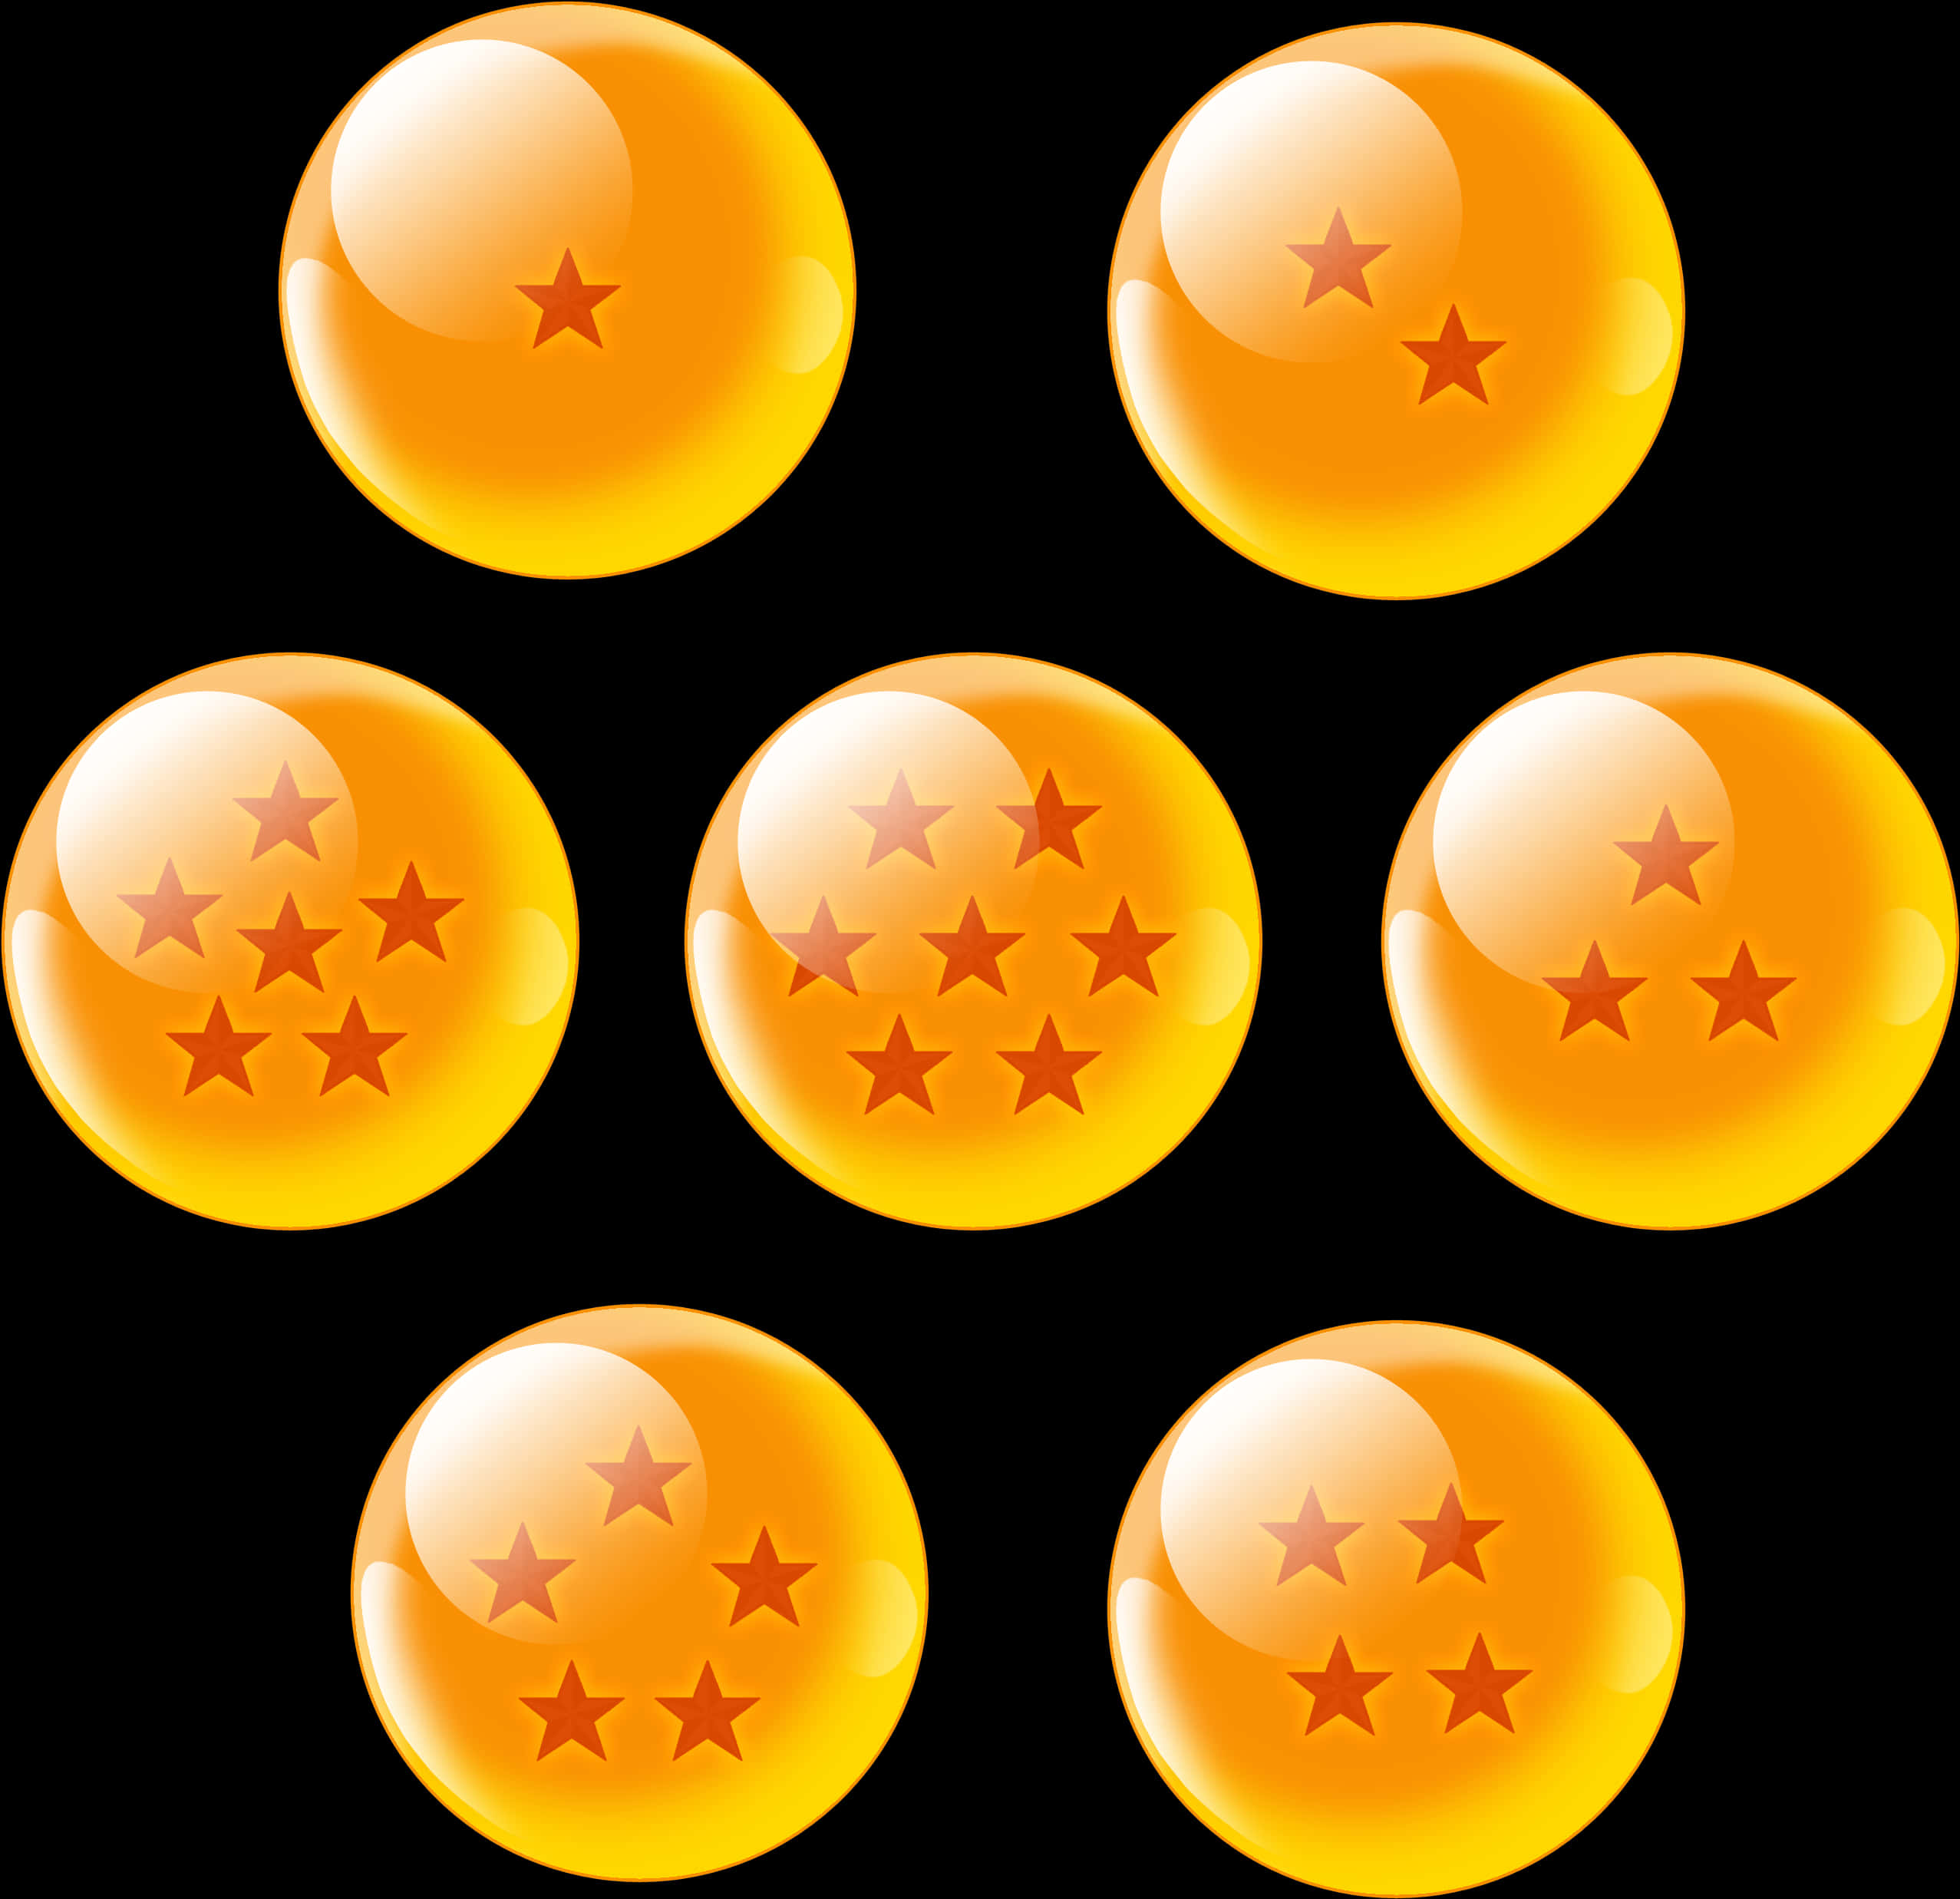 A Group Of Yellow Balls With Stars In Them